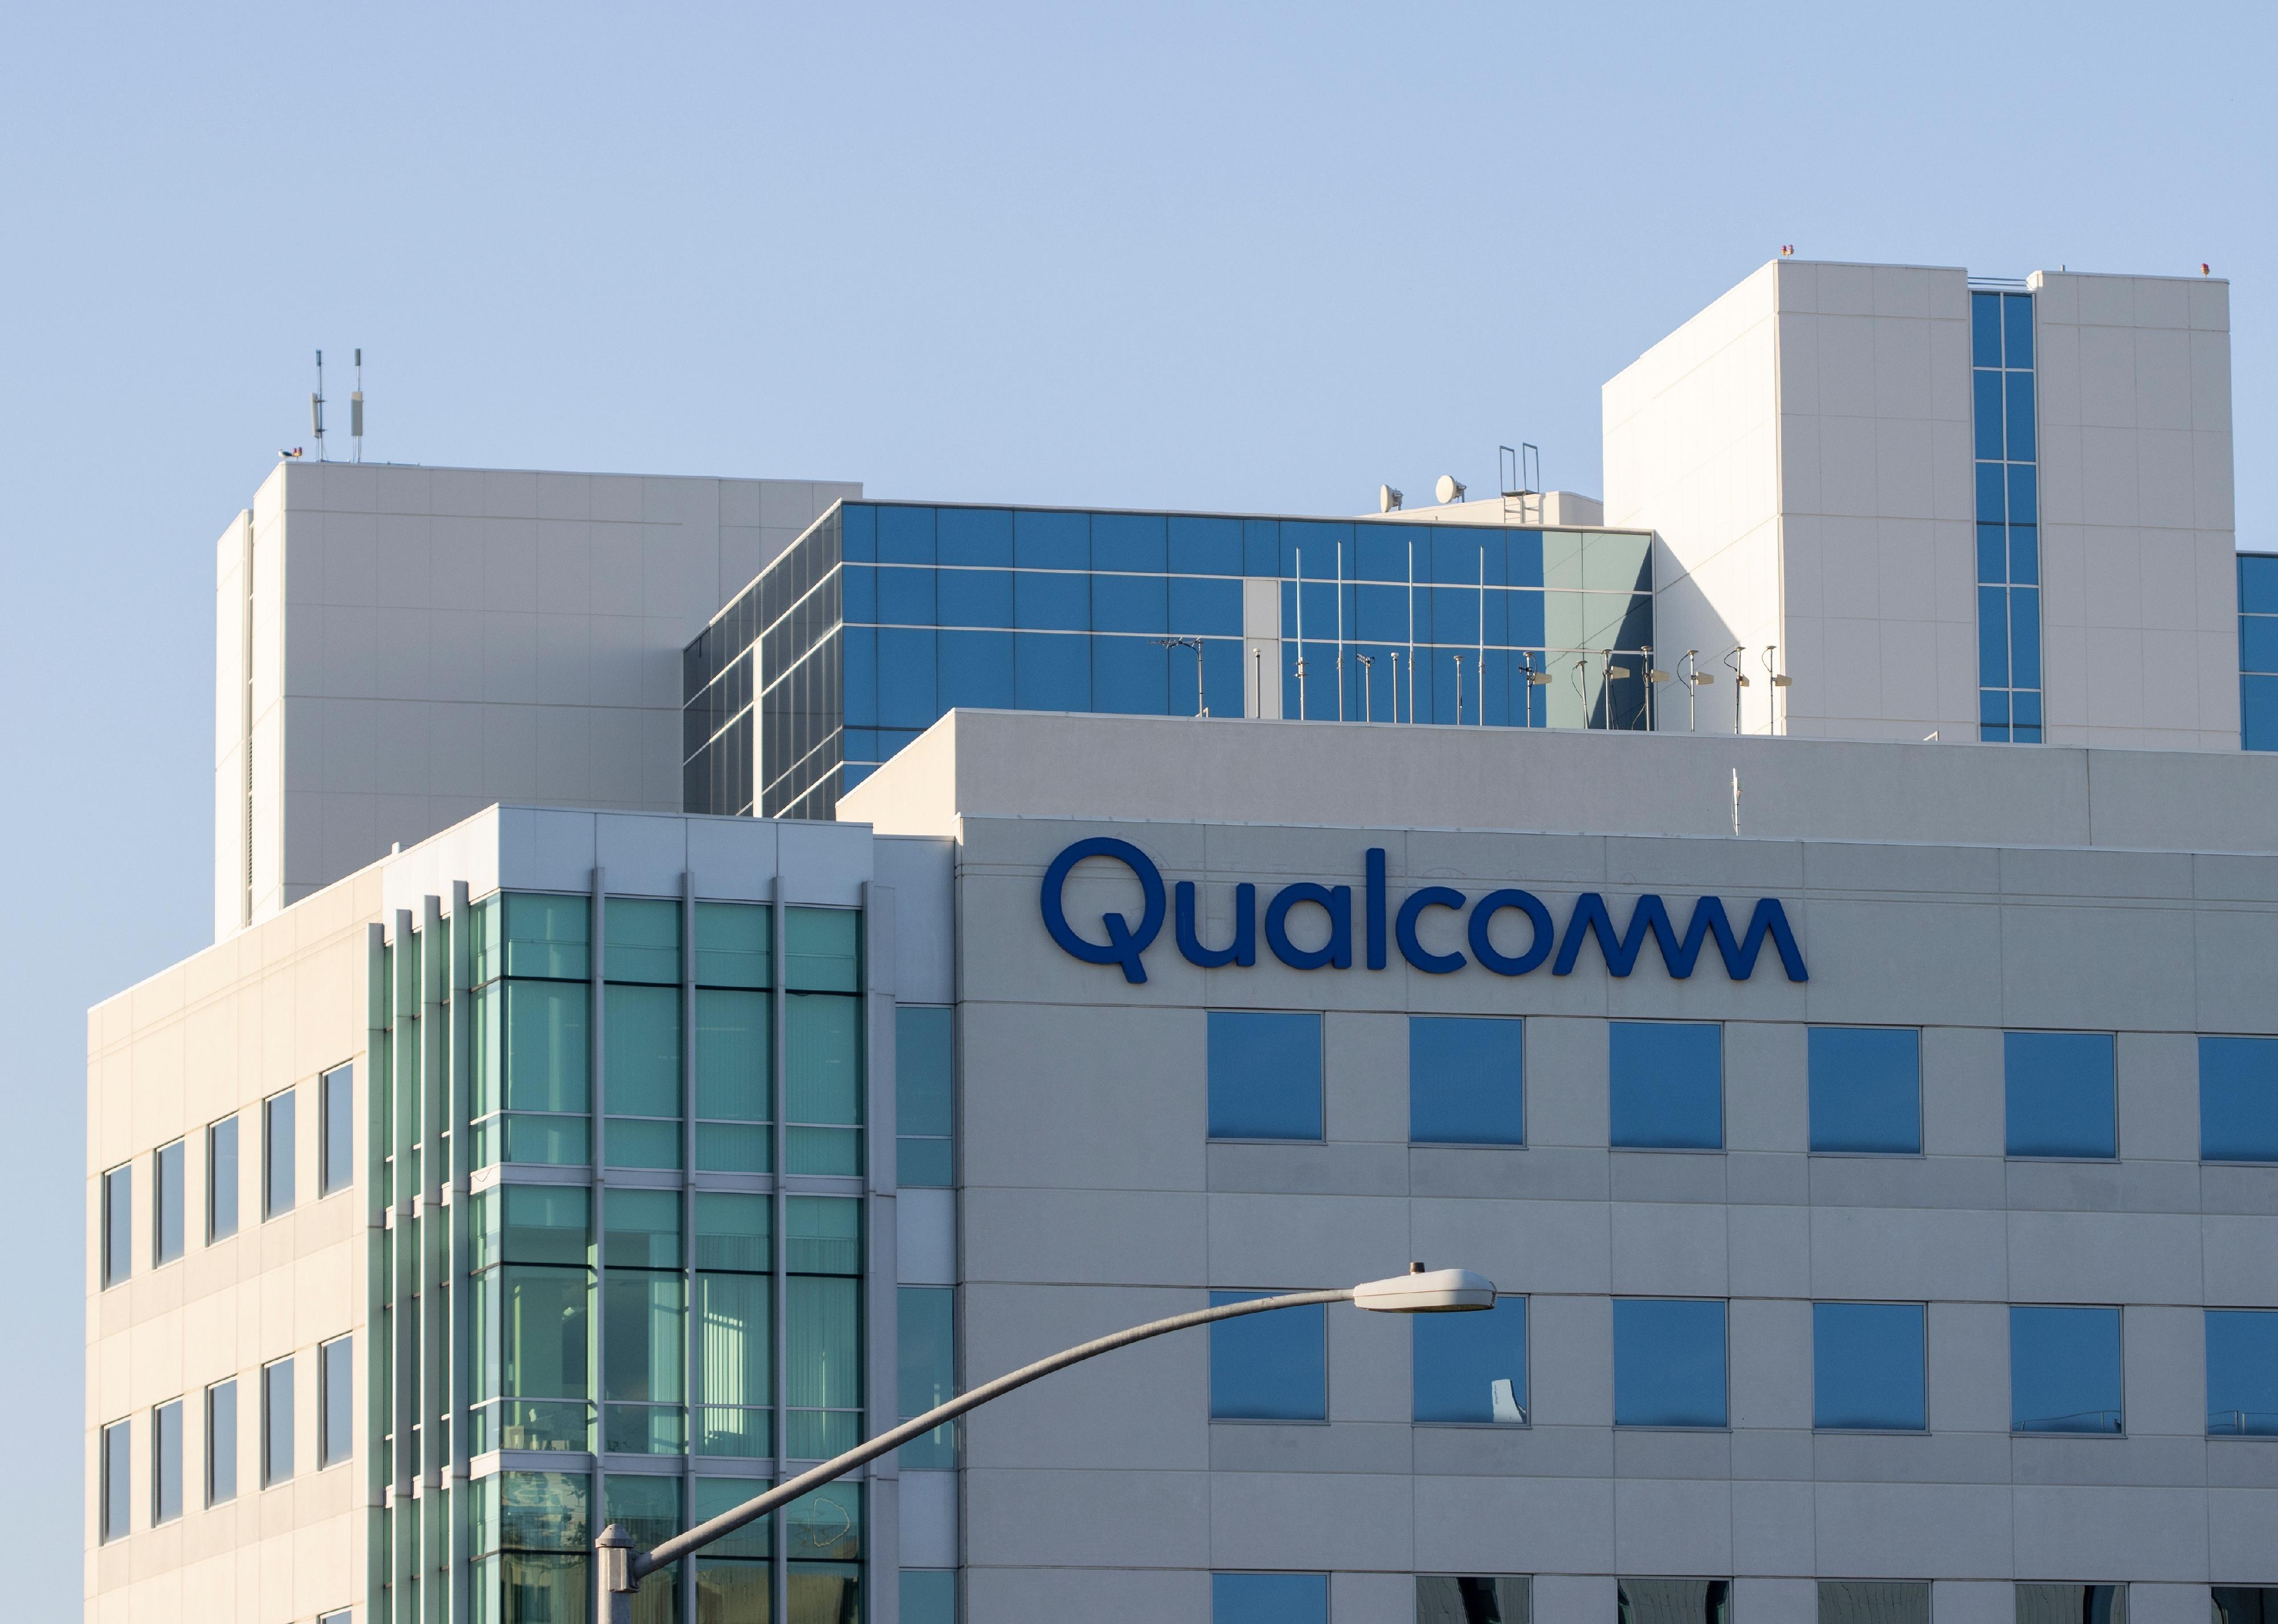 Qualcomm logo is seen at its headquarters in San Diego, California.